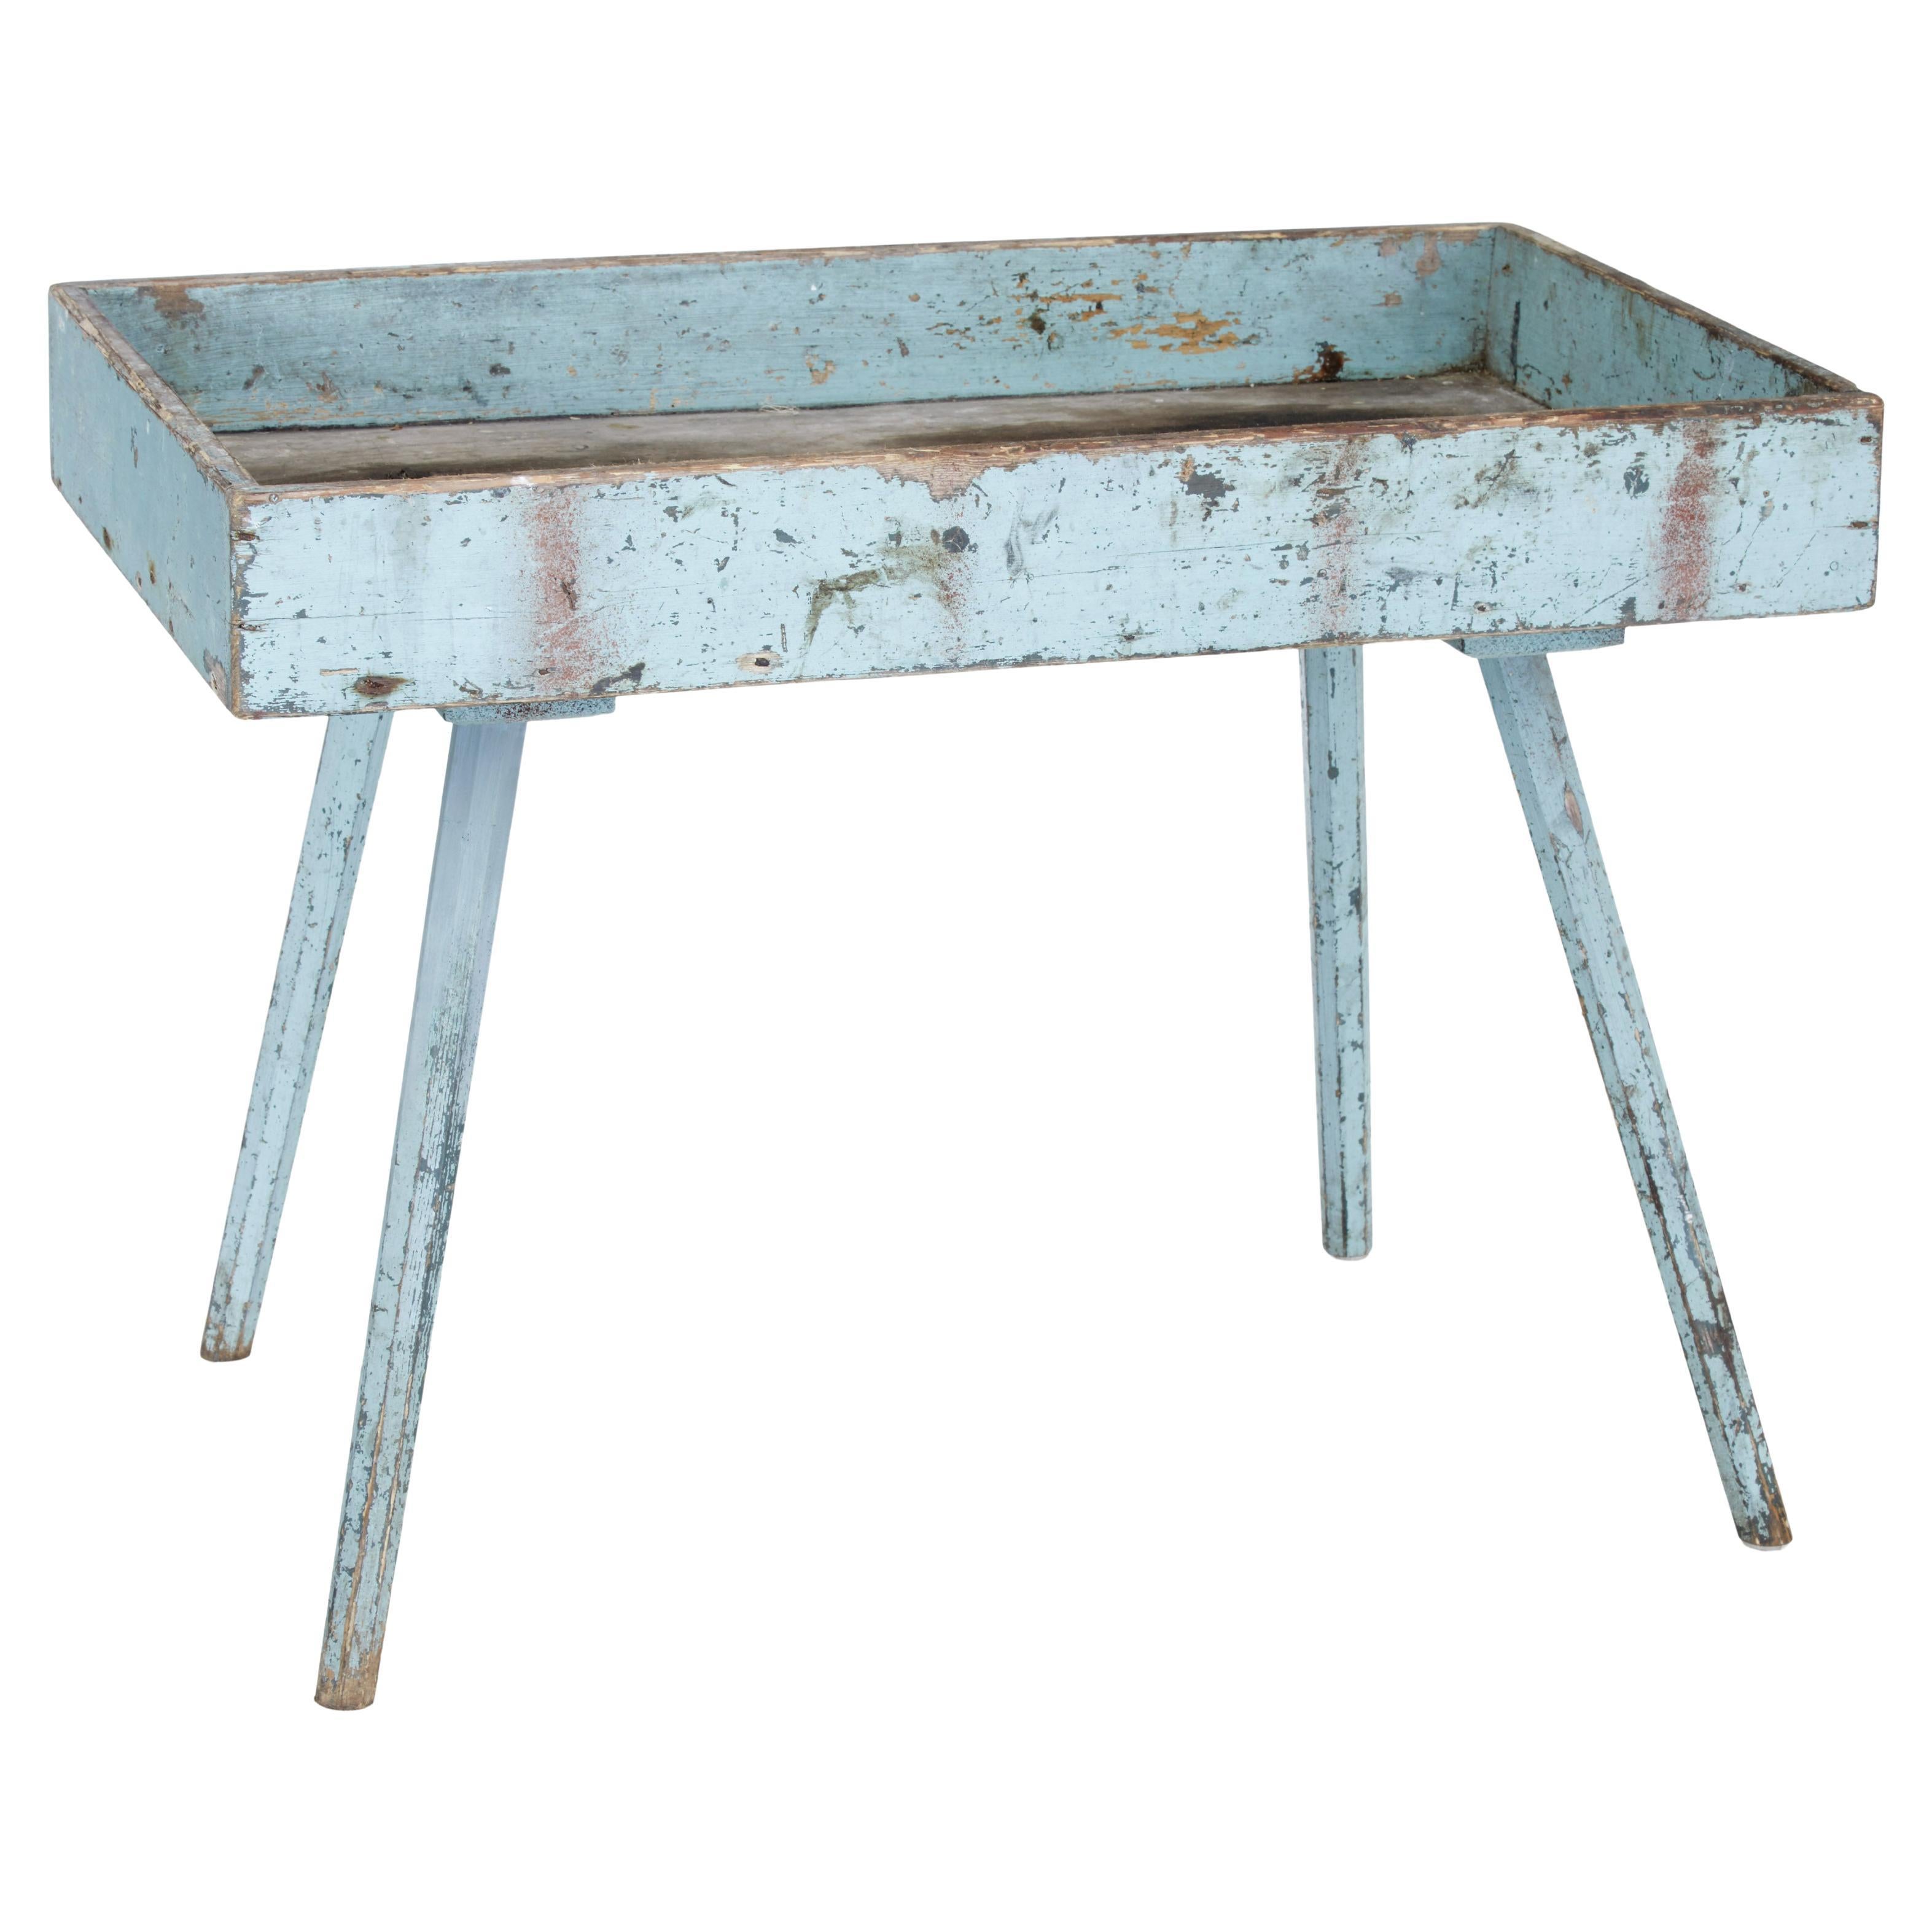 19th Century Rustic Painted Pine Garden Room Tray Table For Sale